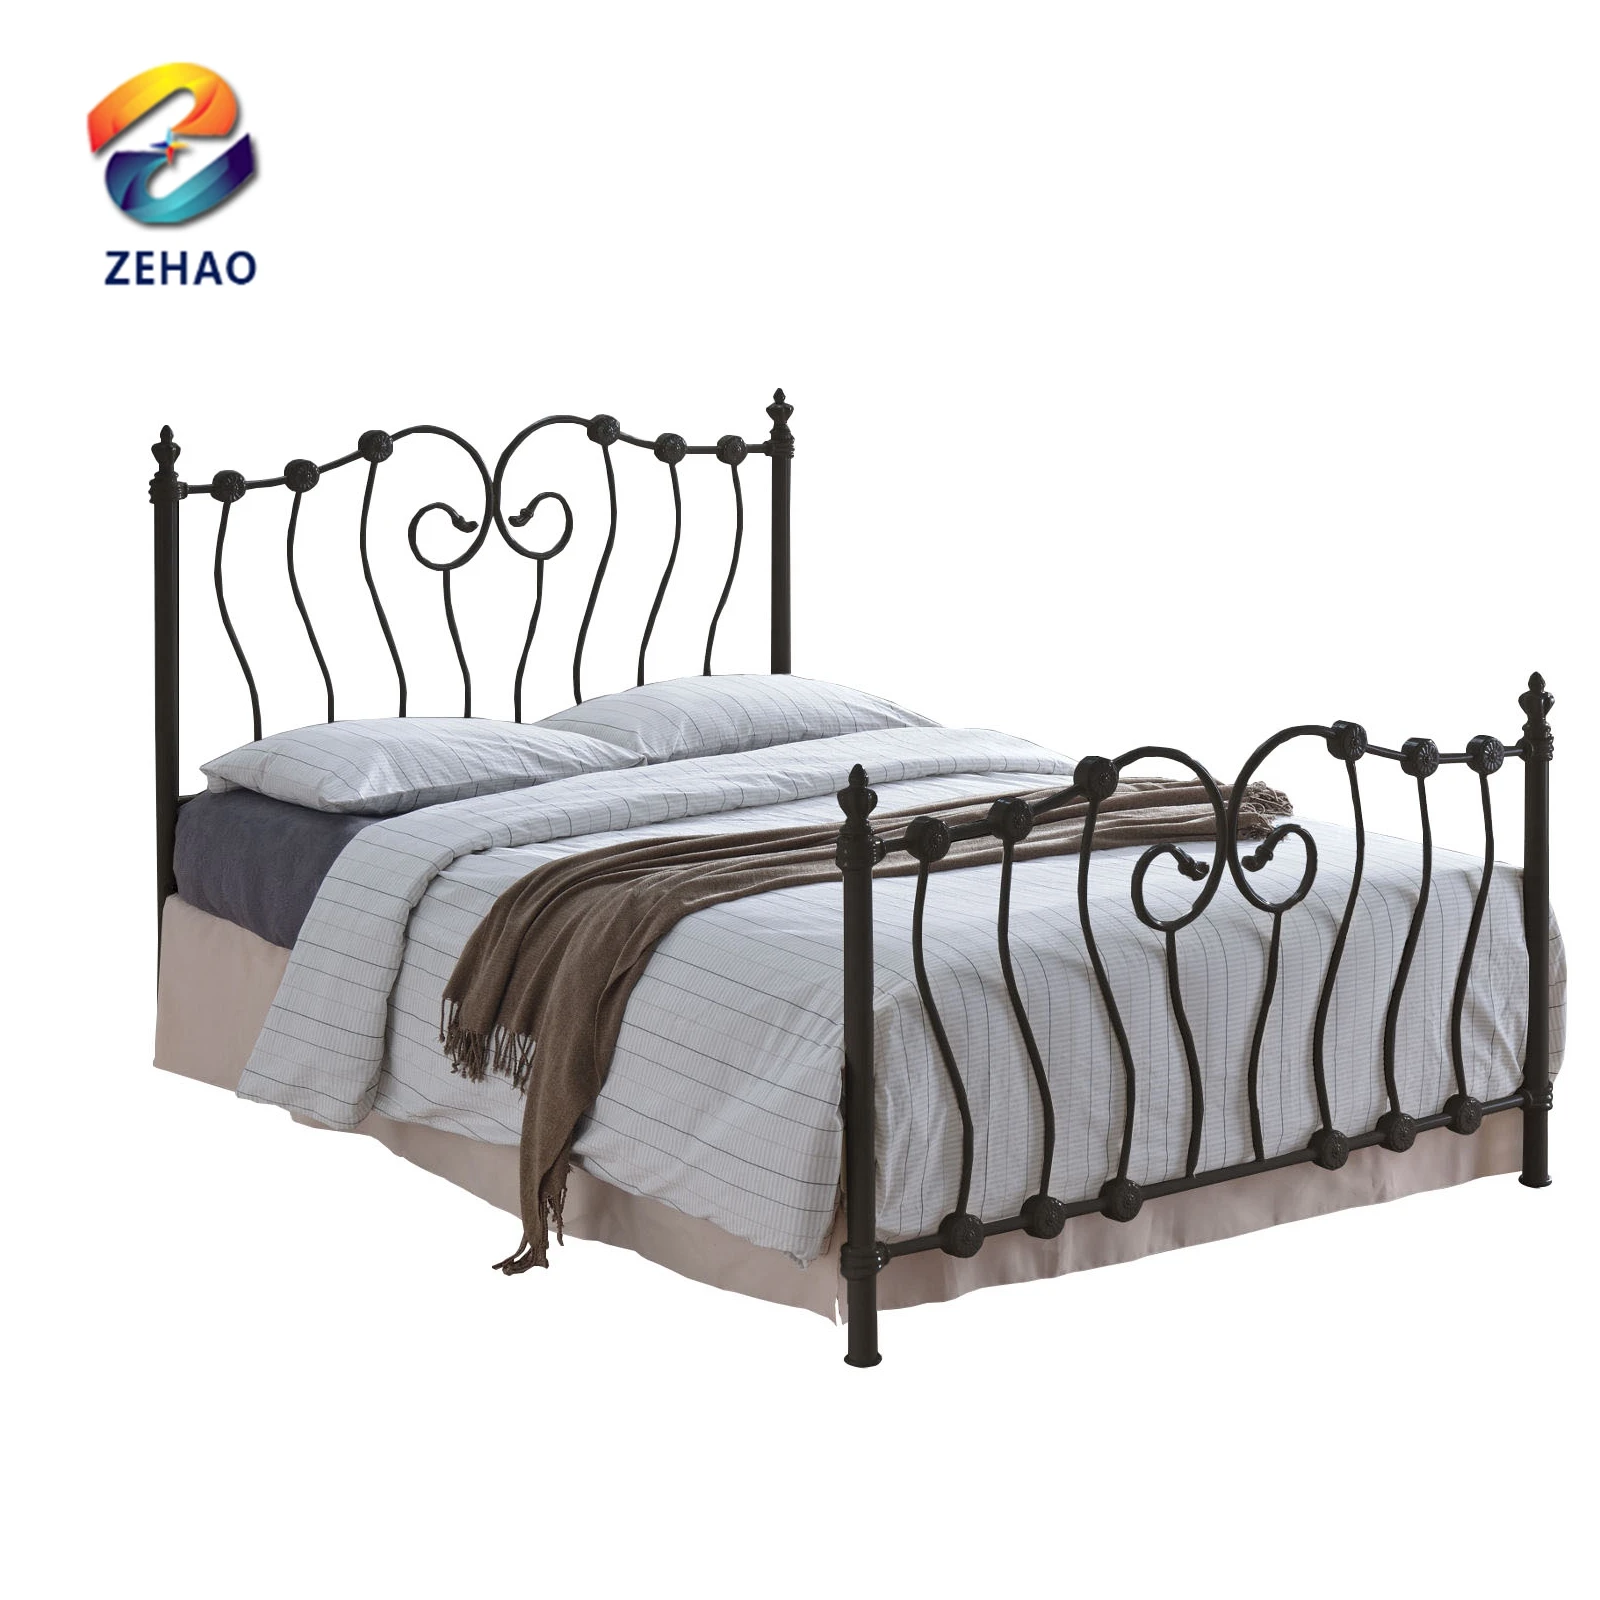 cot double bed size